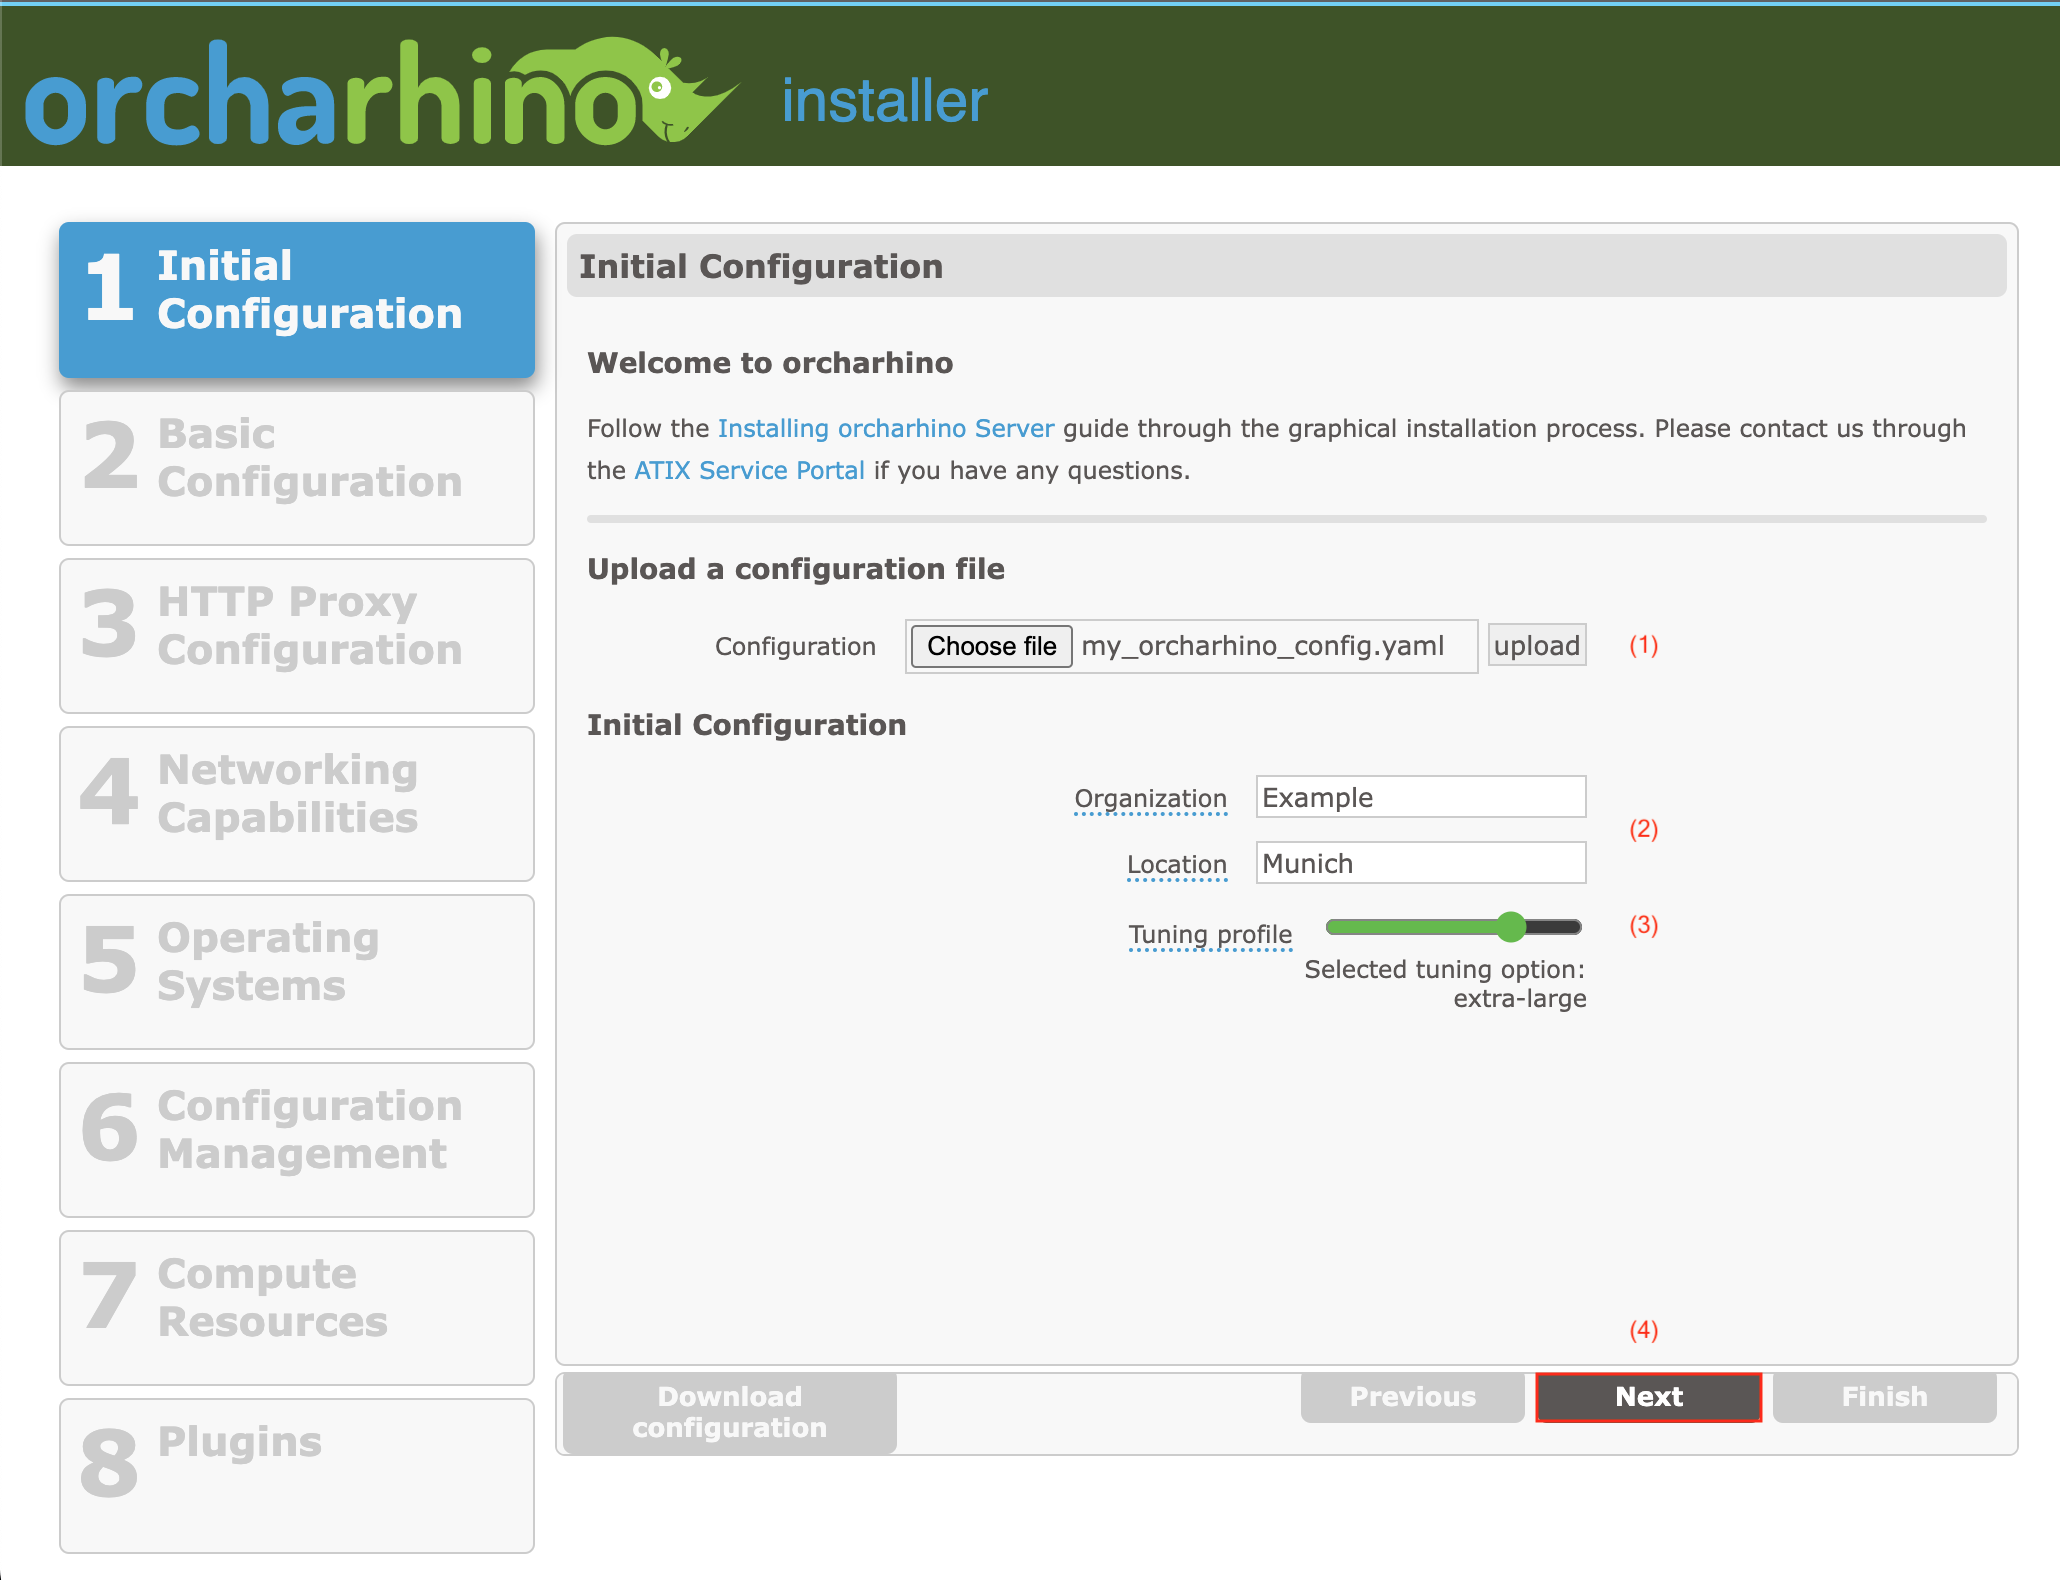 Setting initial configuration in orcharhino Web Installer